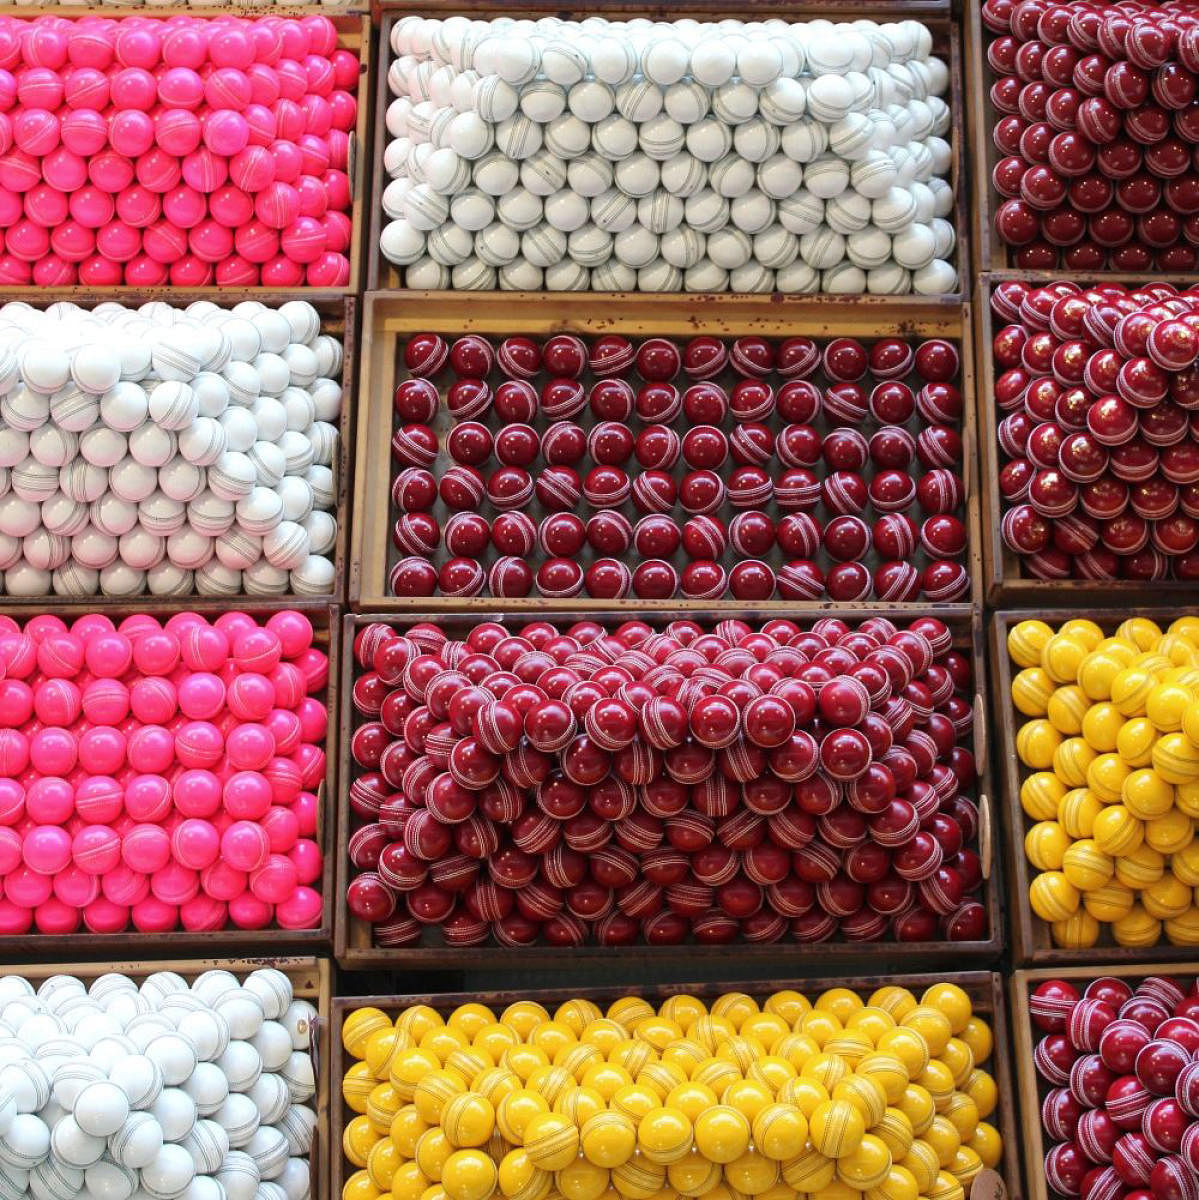 Balls used for different types of matches are exhibited after they have undergone the final stages of production and testing. (Photo: Kookaburra website)